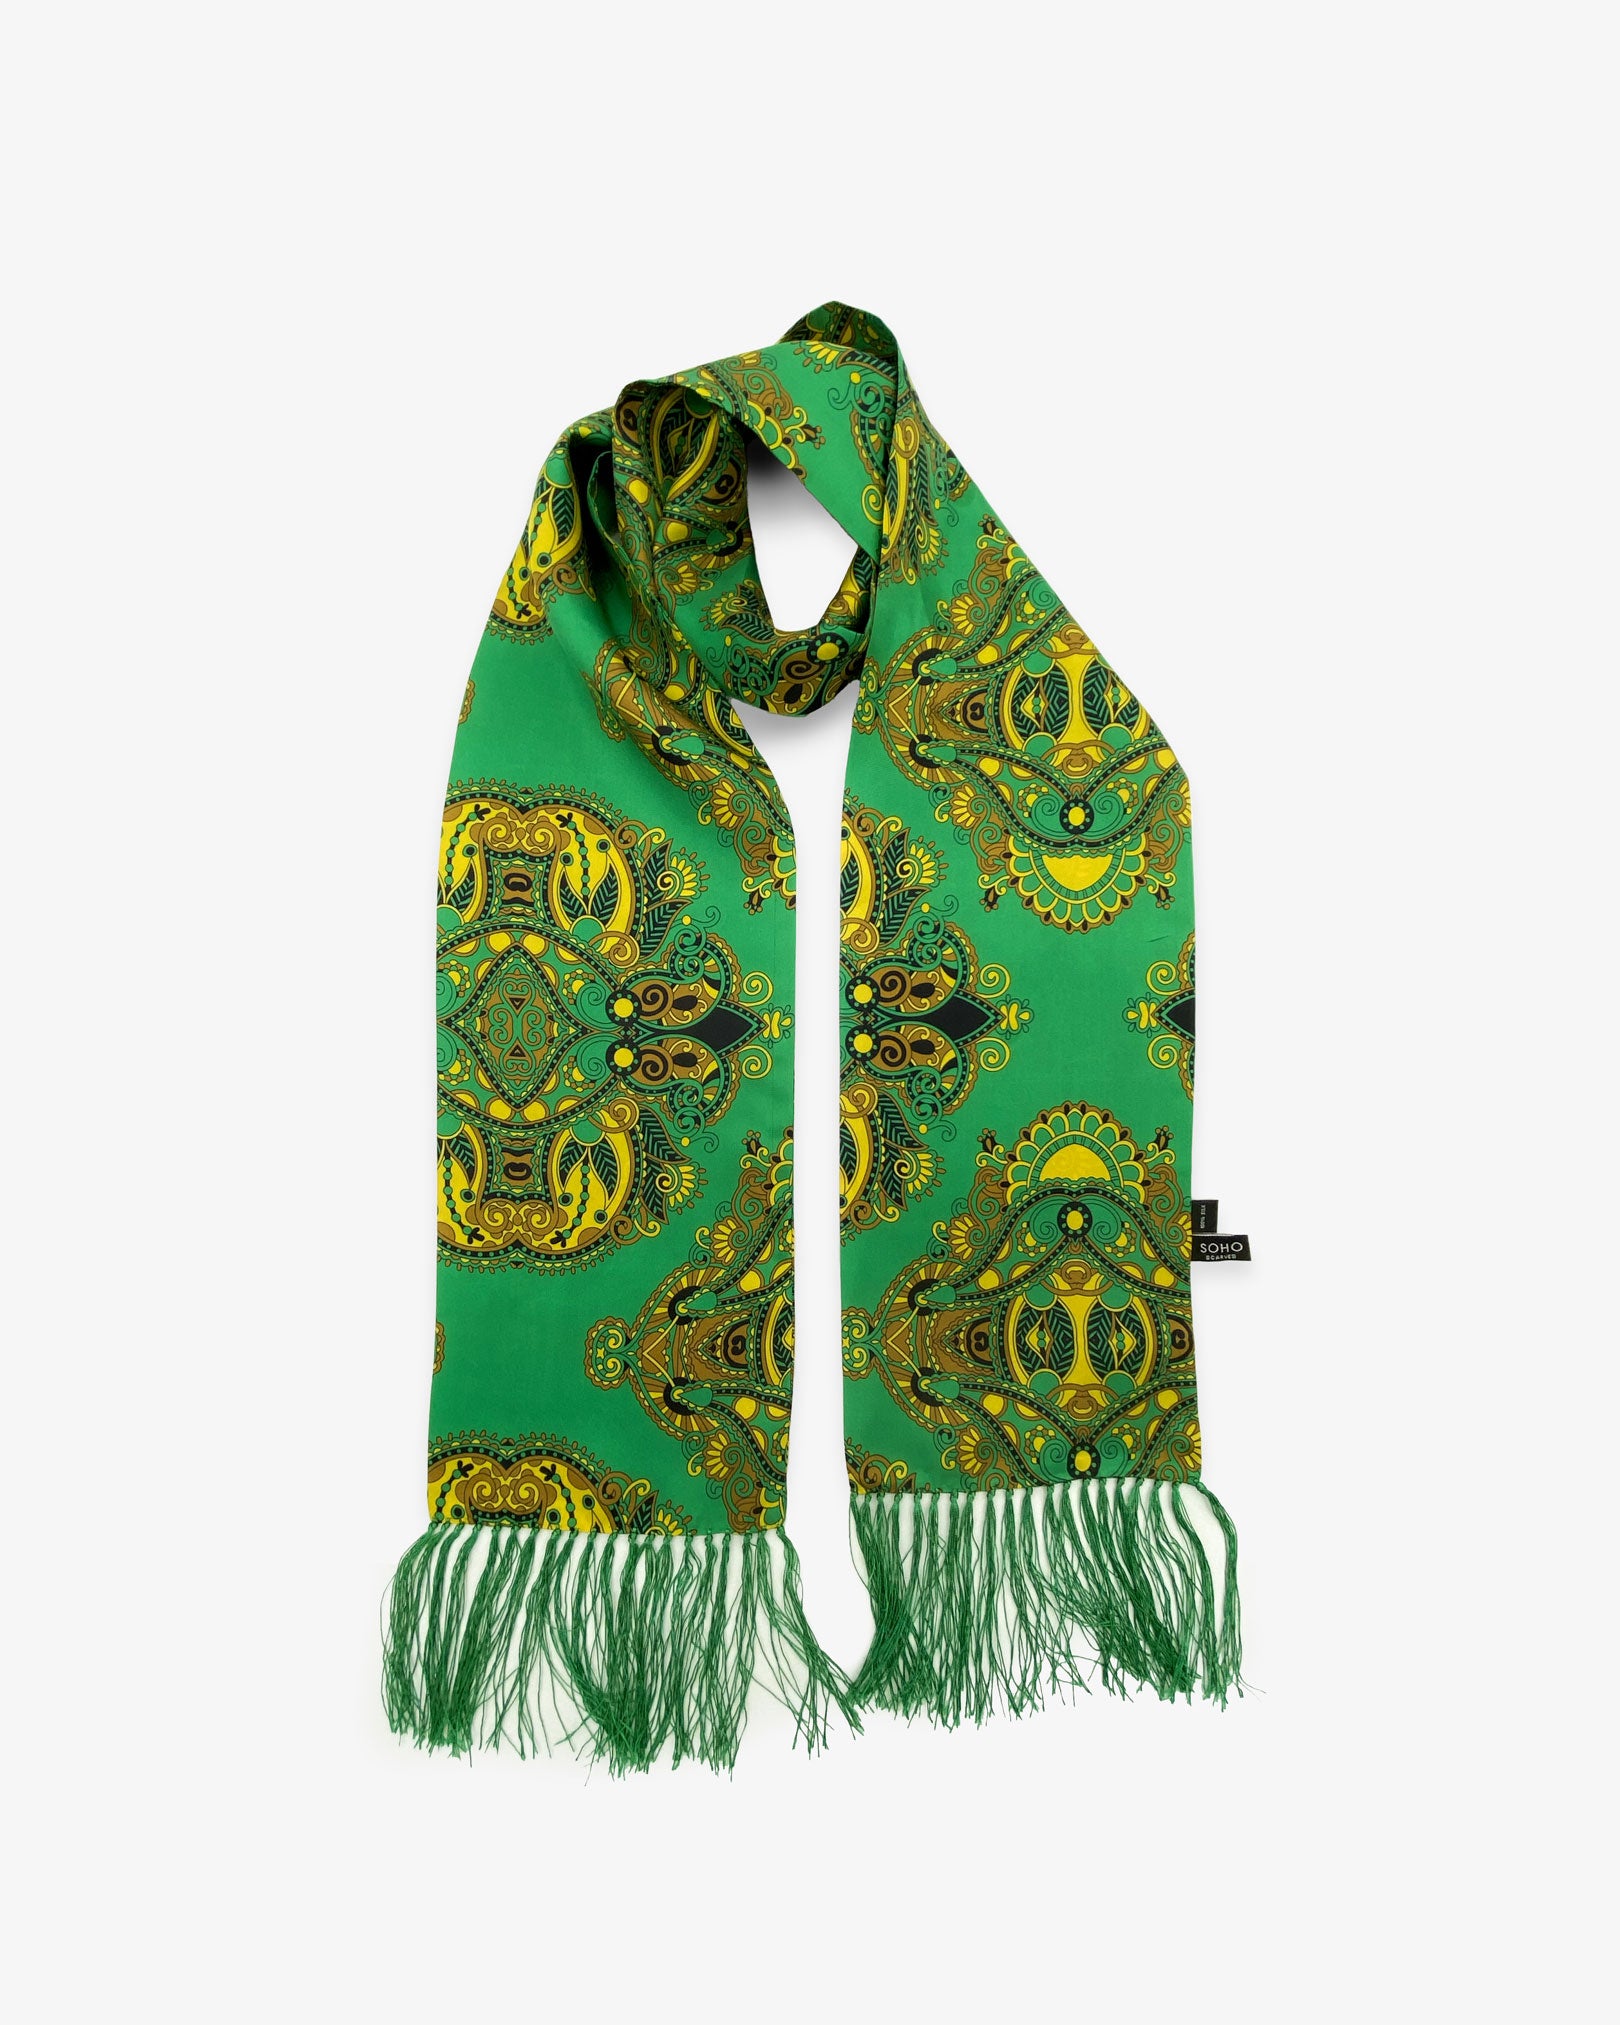 The Forks pure silk aviator scarf looped in middle with both ends parallel, showing paisley-inspired patterns on an emerald-green ground